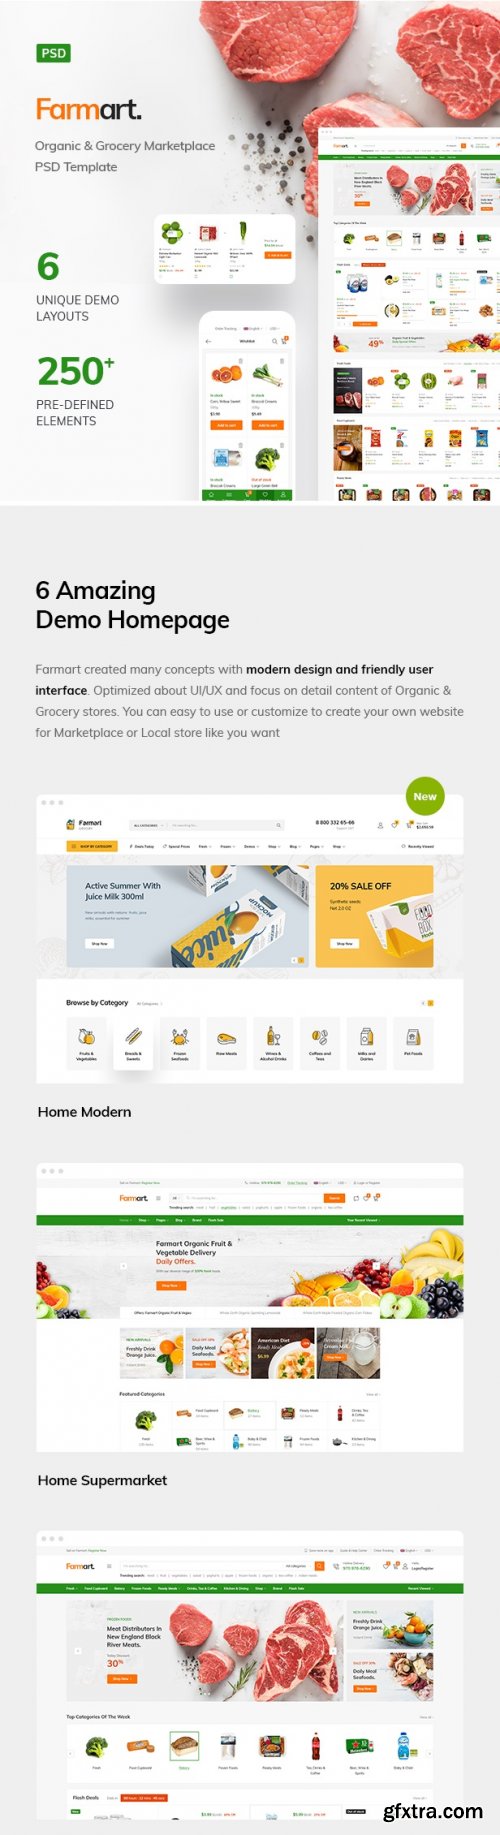 Farmart - Foods & Grocery Marketplace PSD Template